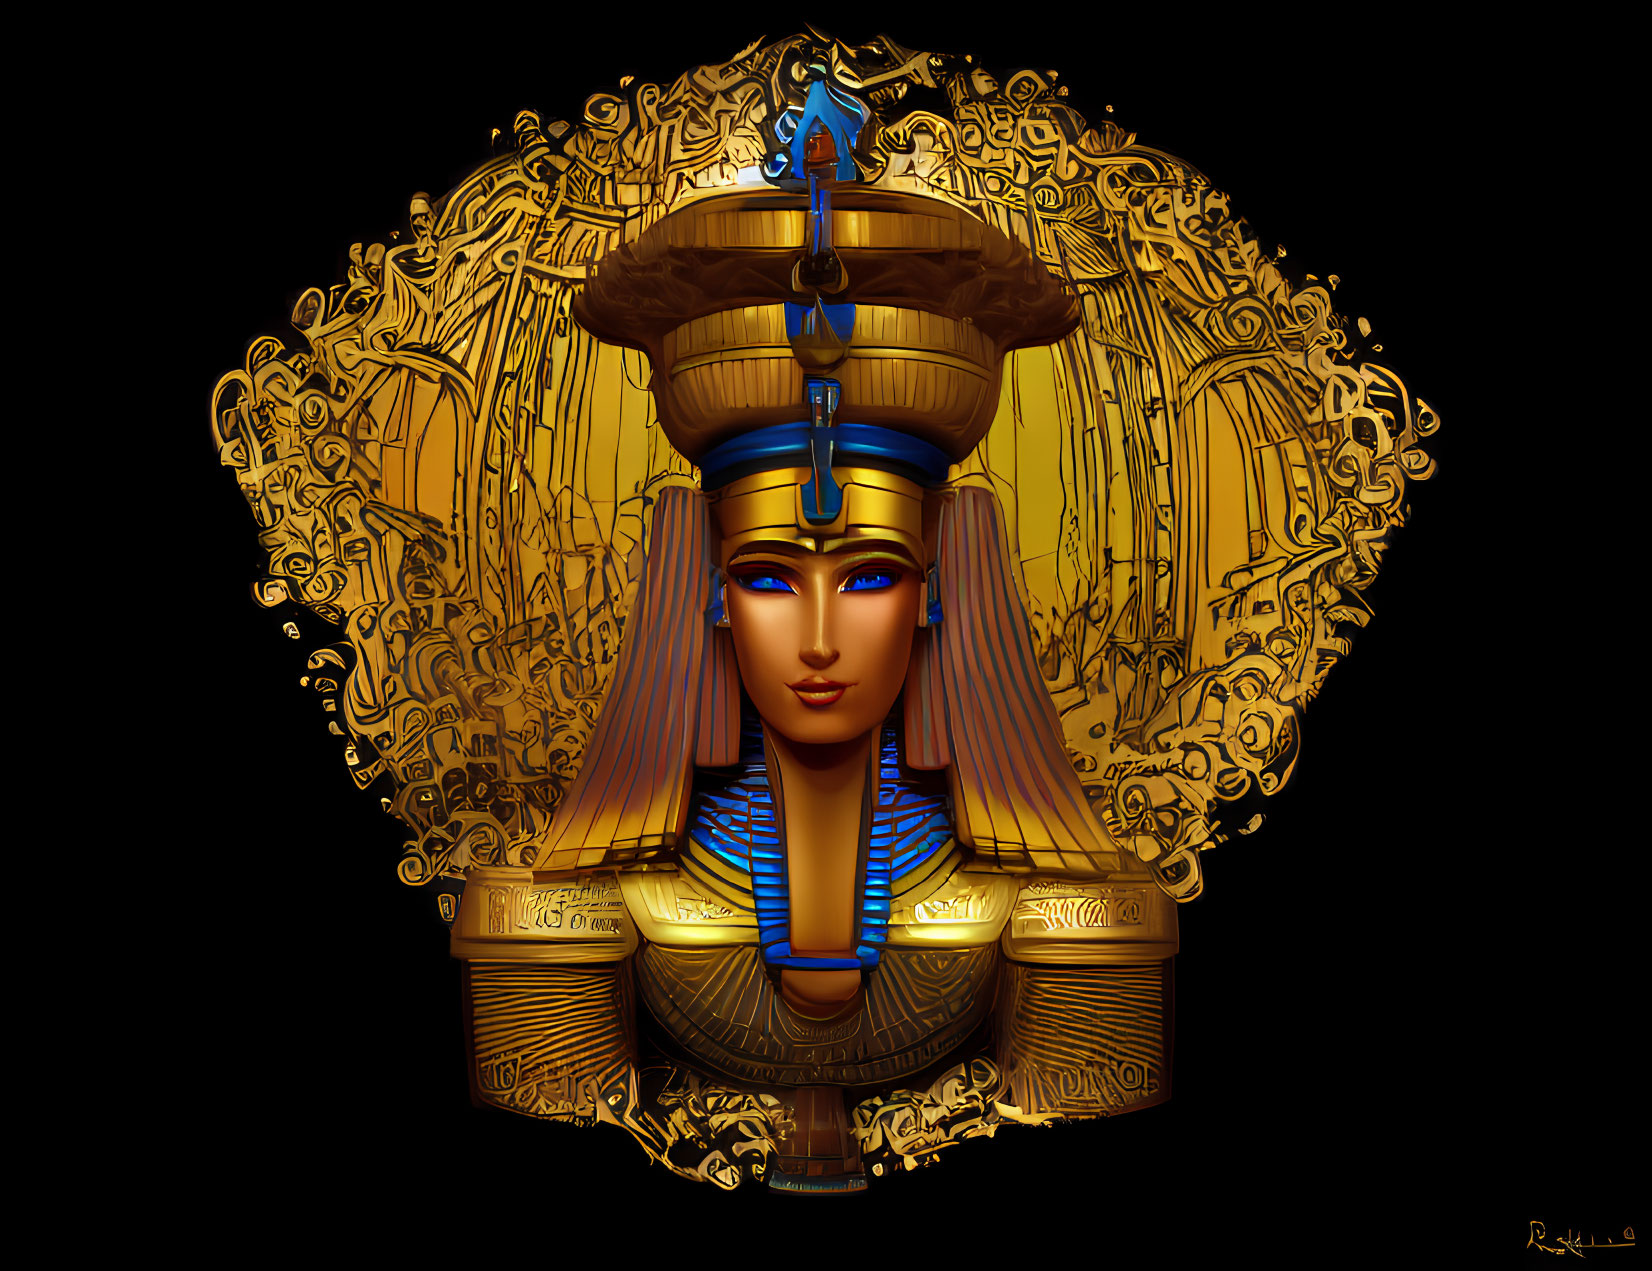 Egyptian Pharaoh with golden headdress and hieroglyphic background